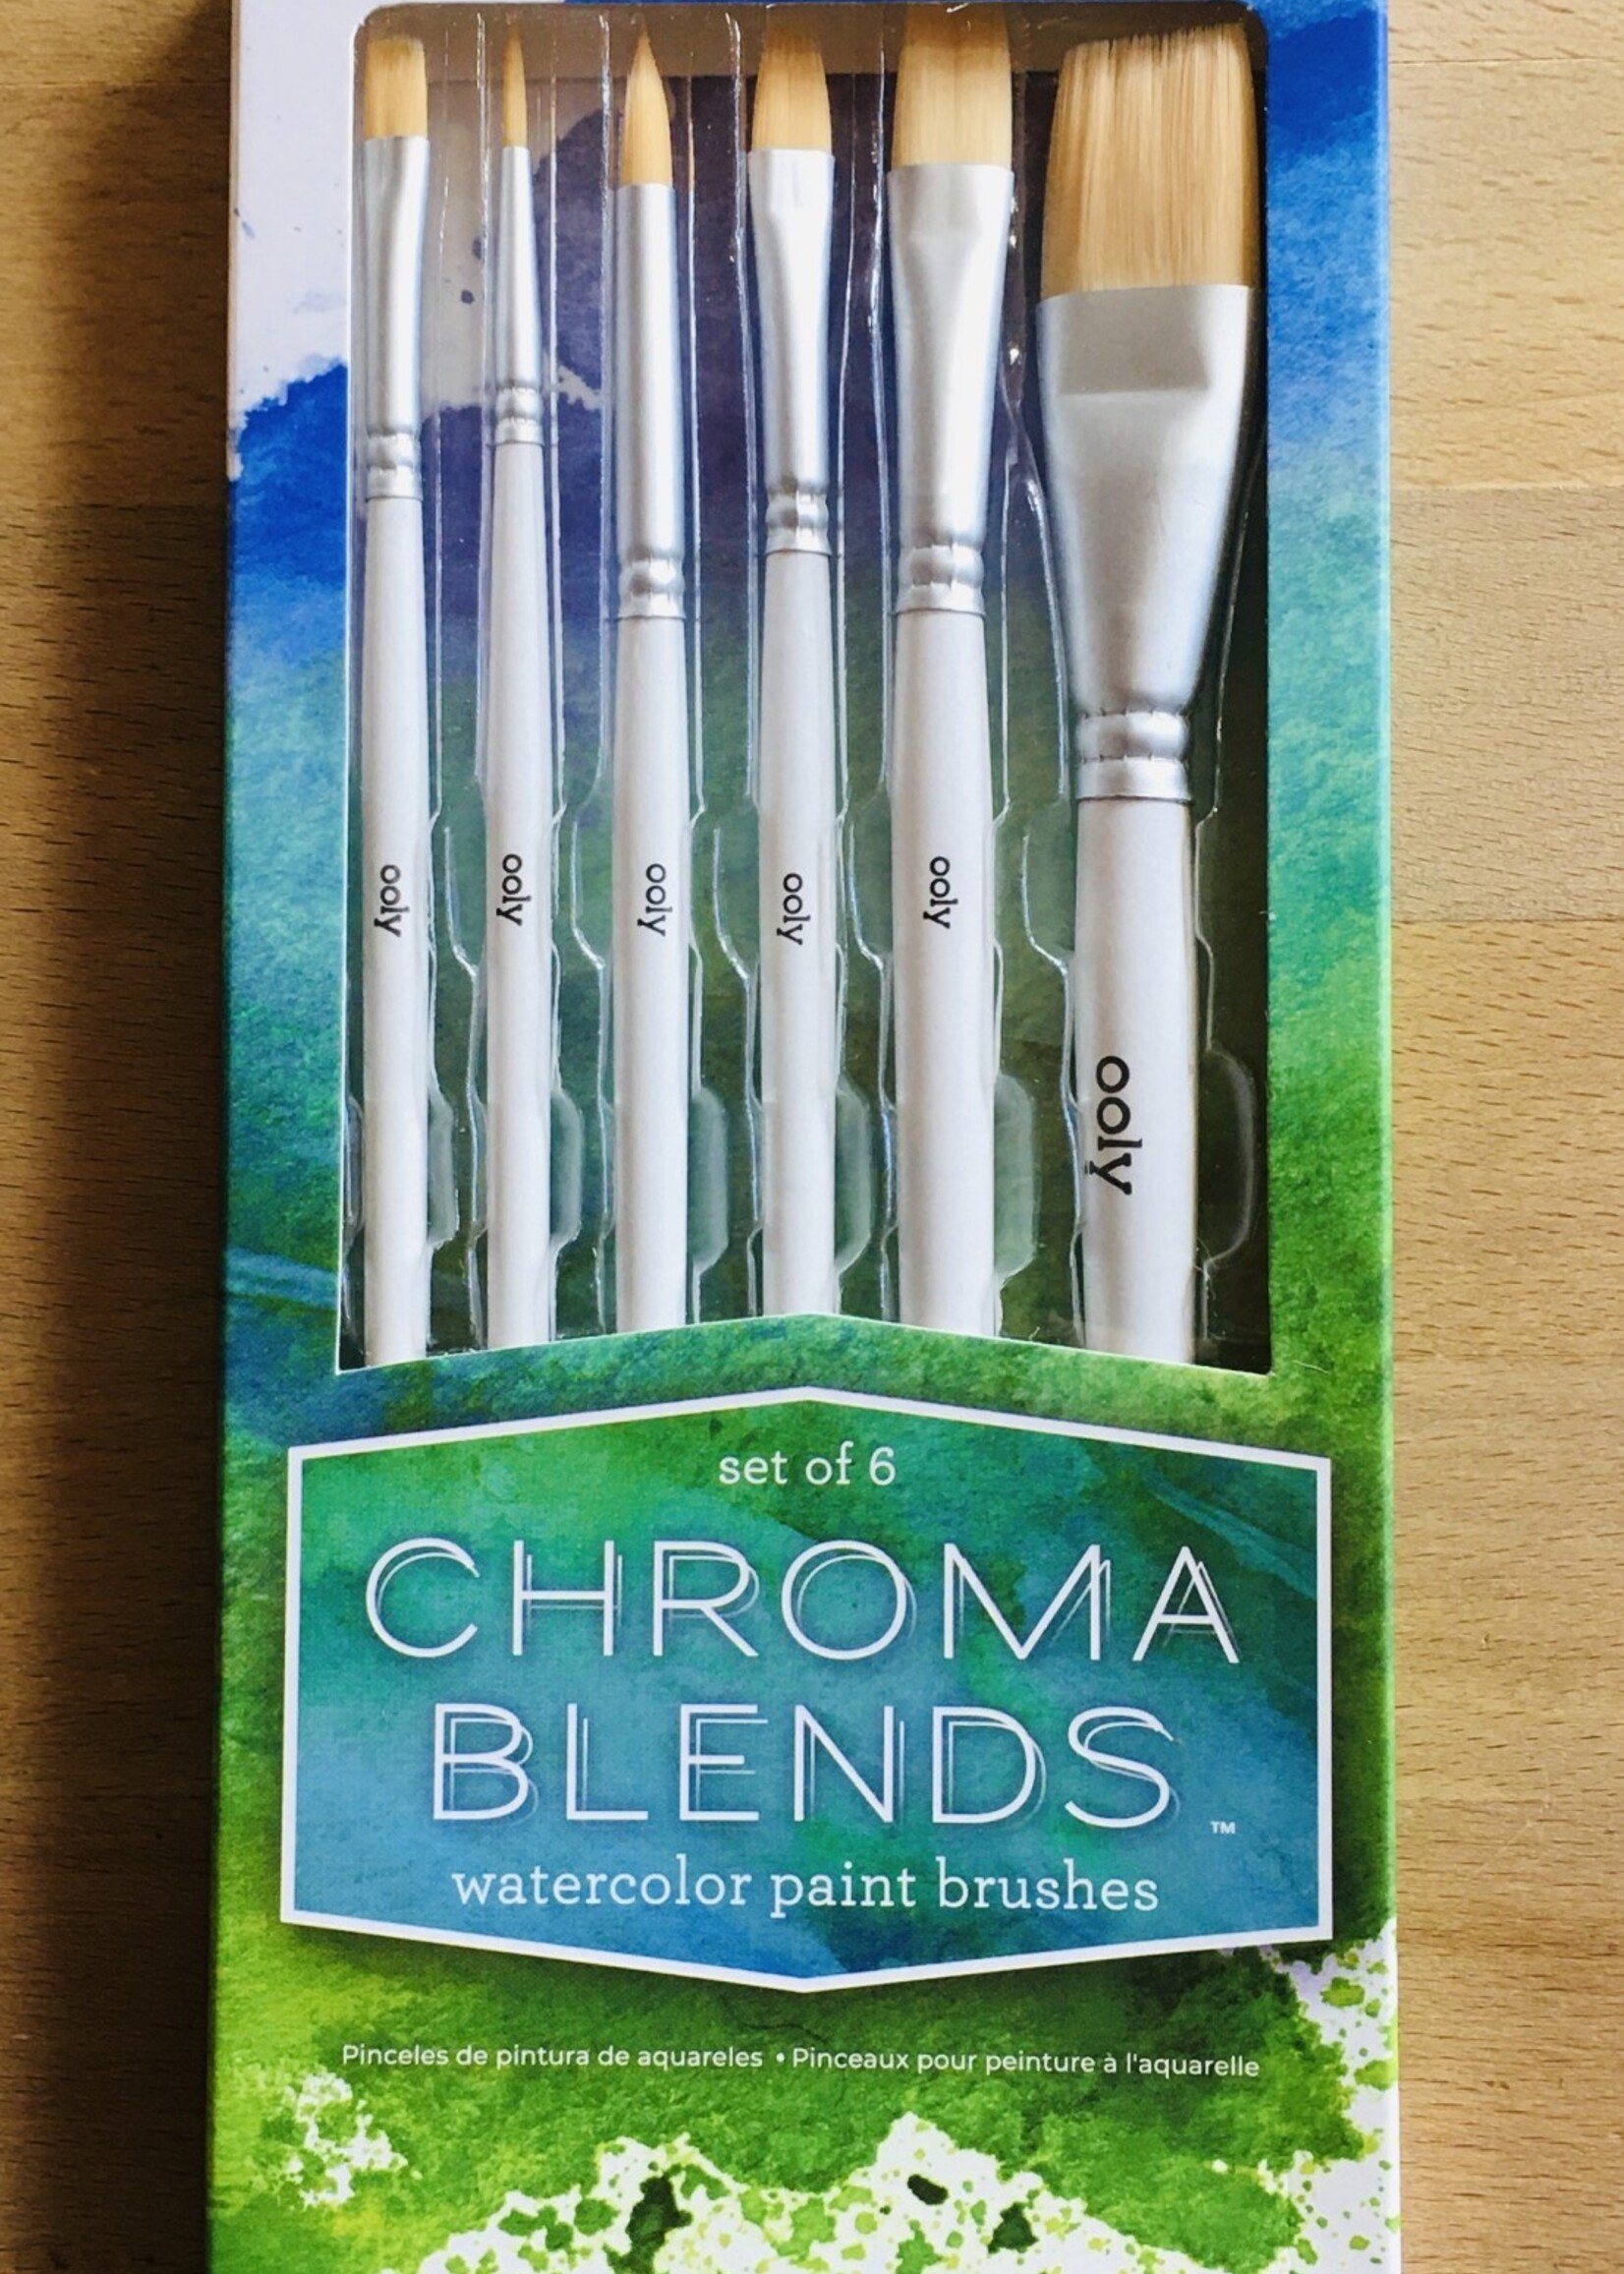 Chroma Blends- watercolor paint brushes